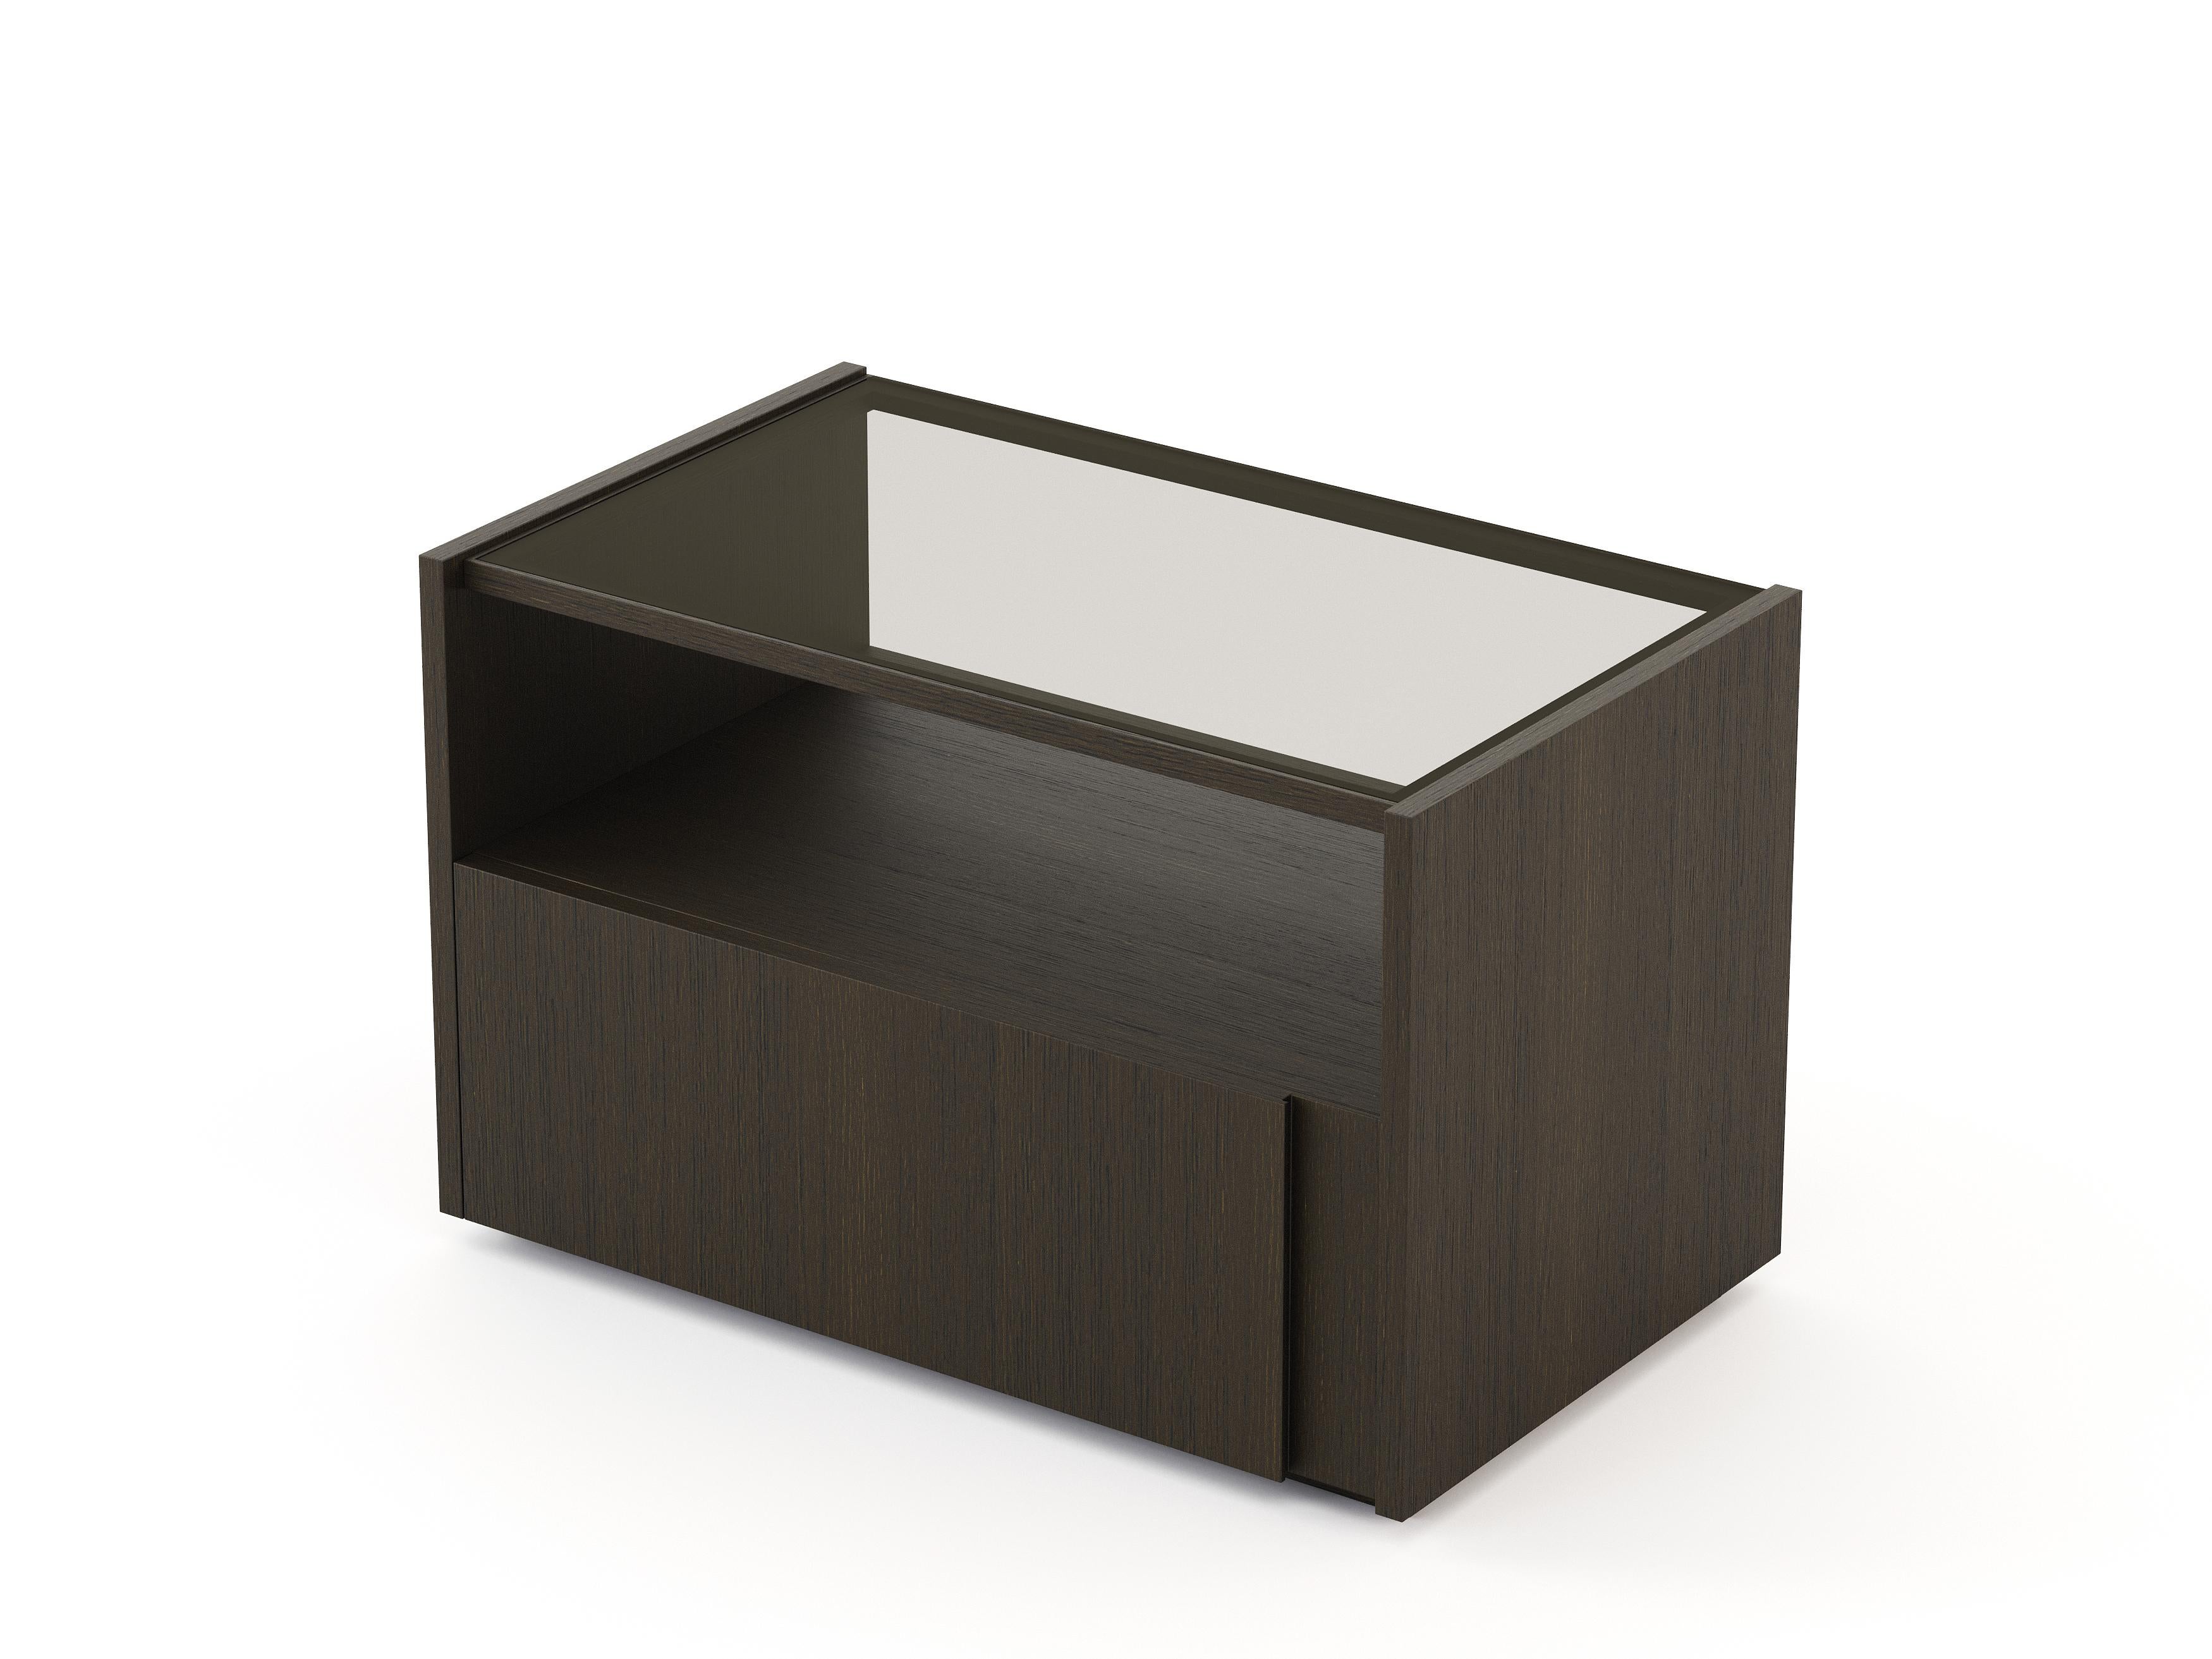 Portuguese Modern Sevilha Nightstand Made with Walnut and Glass, Handmade by Stylish Club For Sale